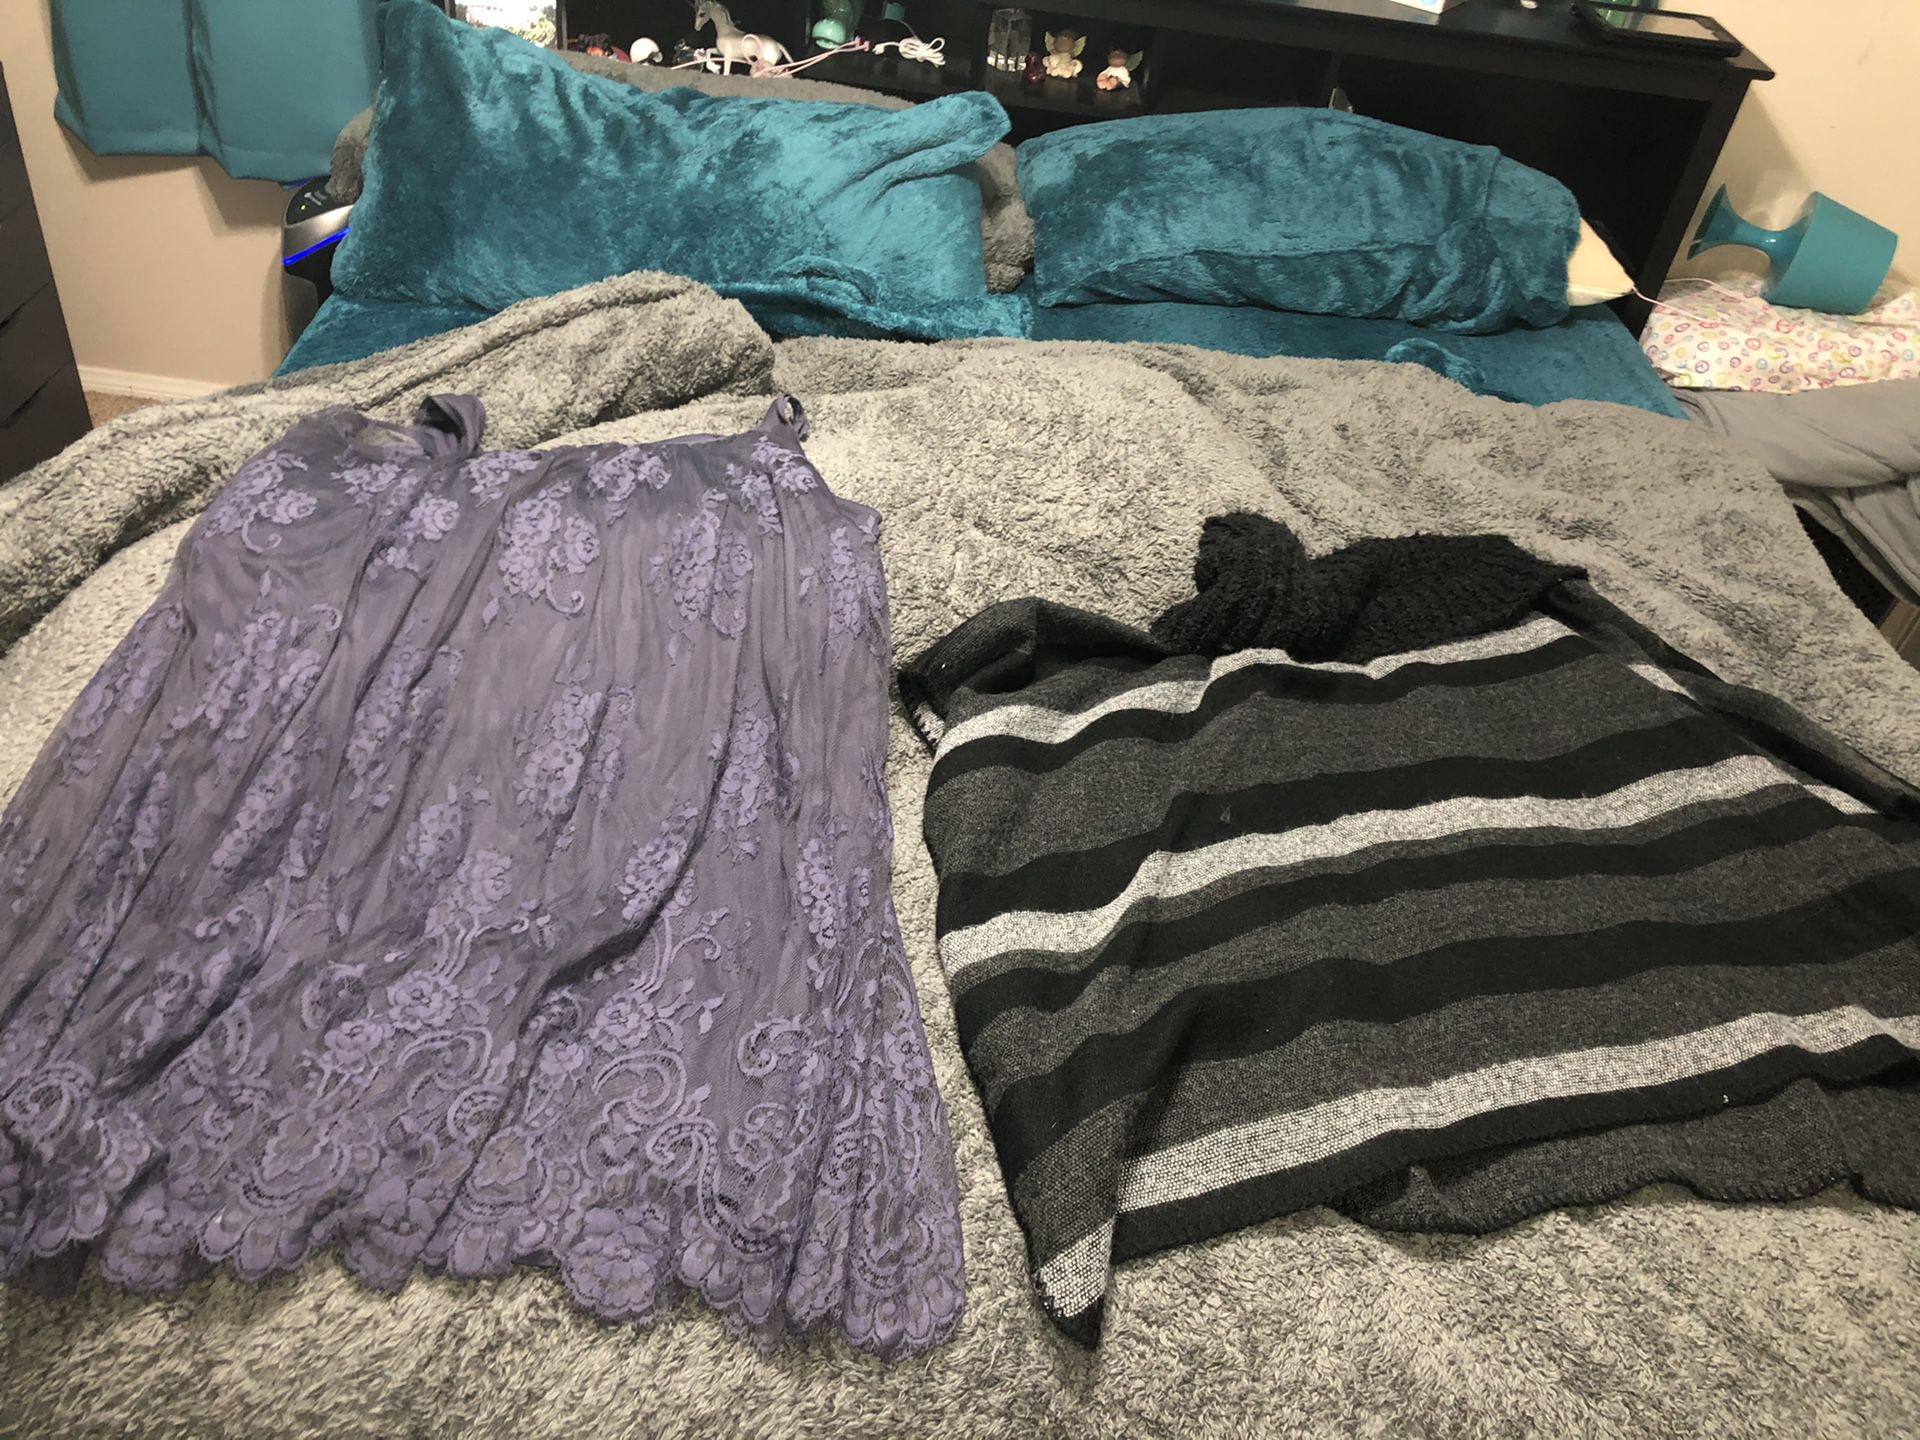 Lot of plus size clothes. Size 4-6 torrid brand. Good condition.